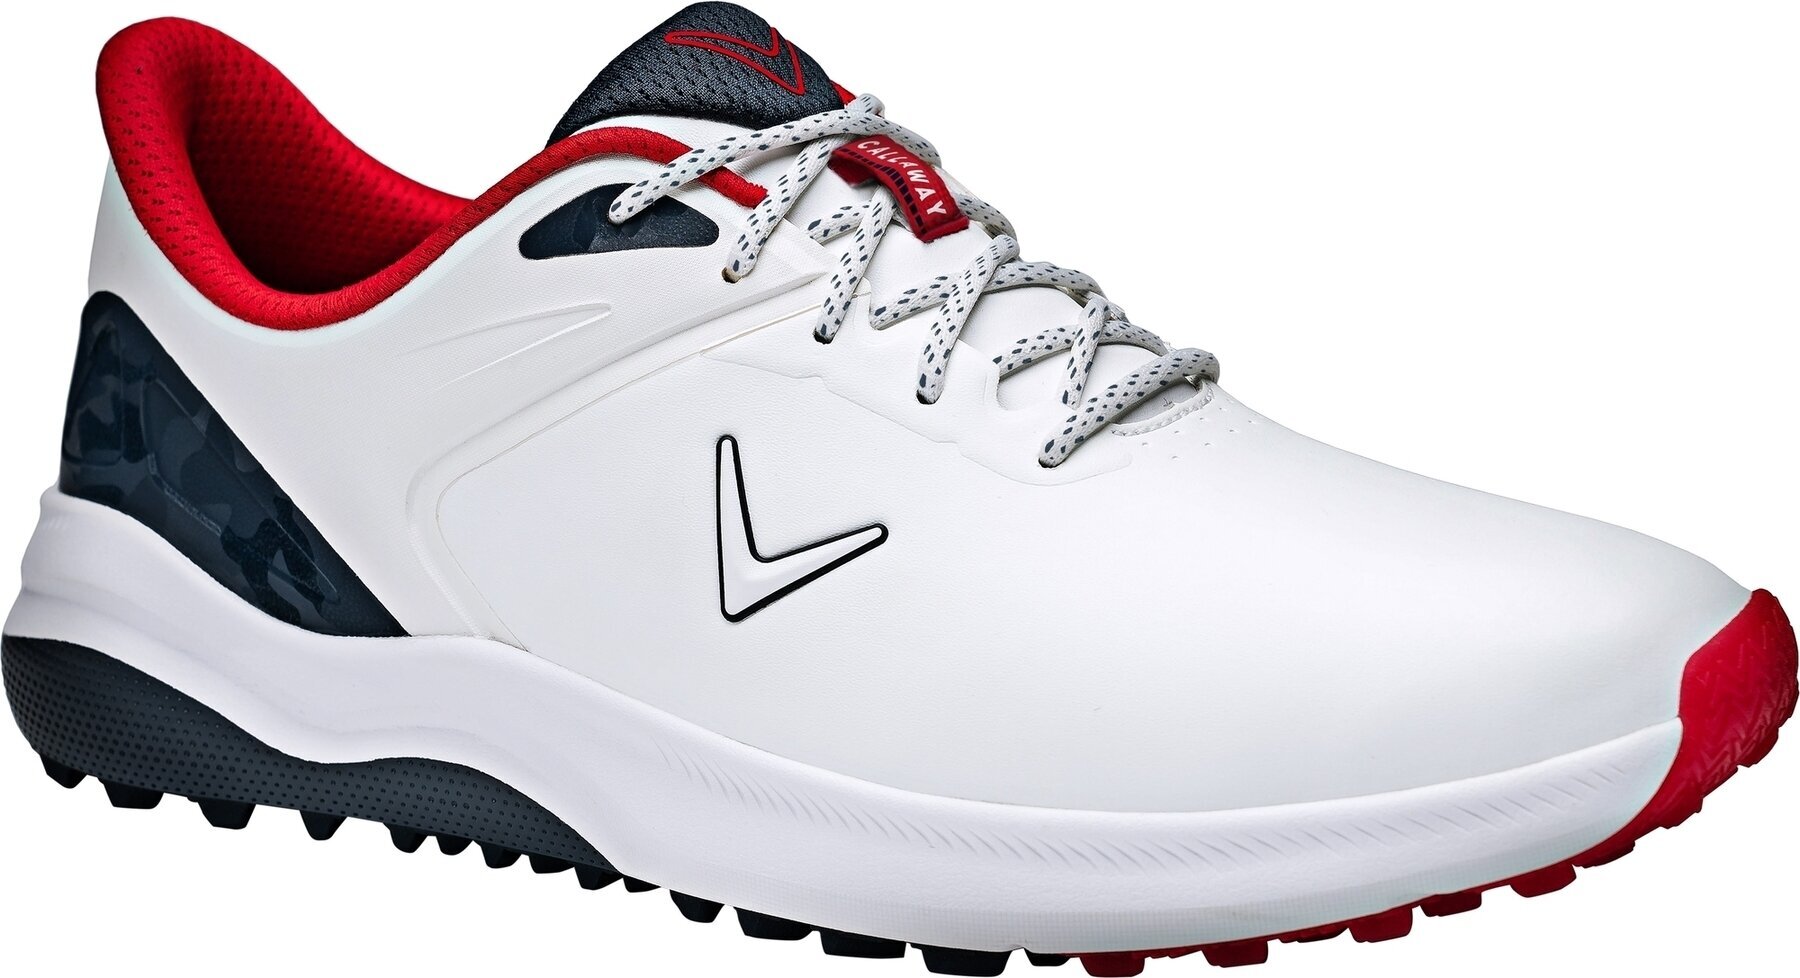 Men's golf shoes Callaway Lazer Mens Golf Shoes White/Navy/Red 40